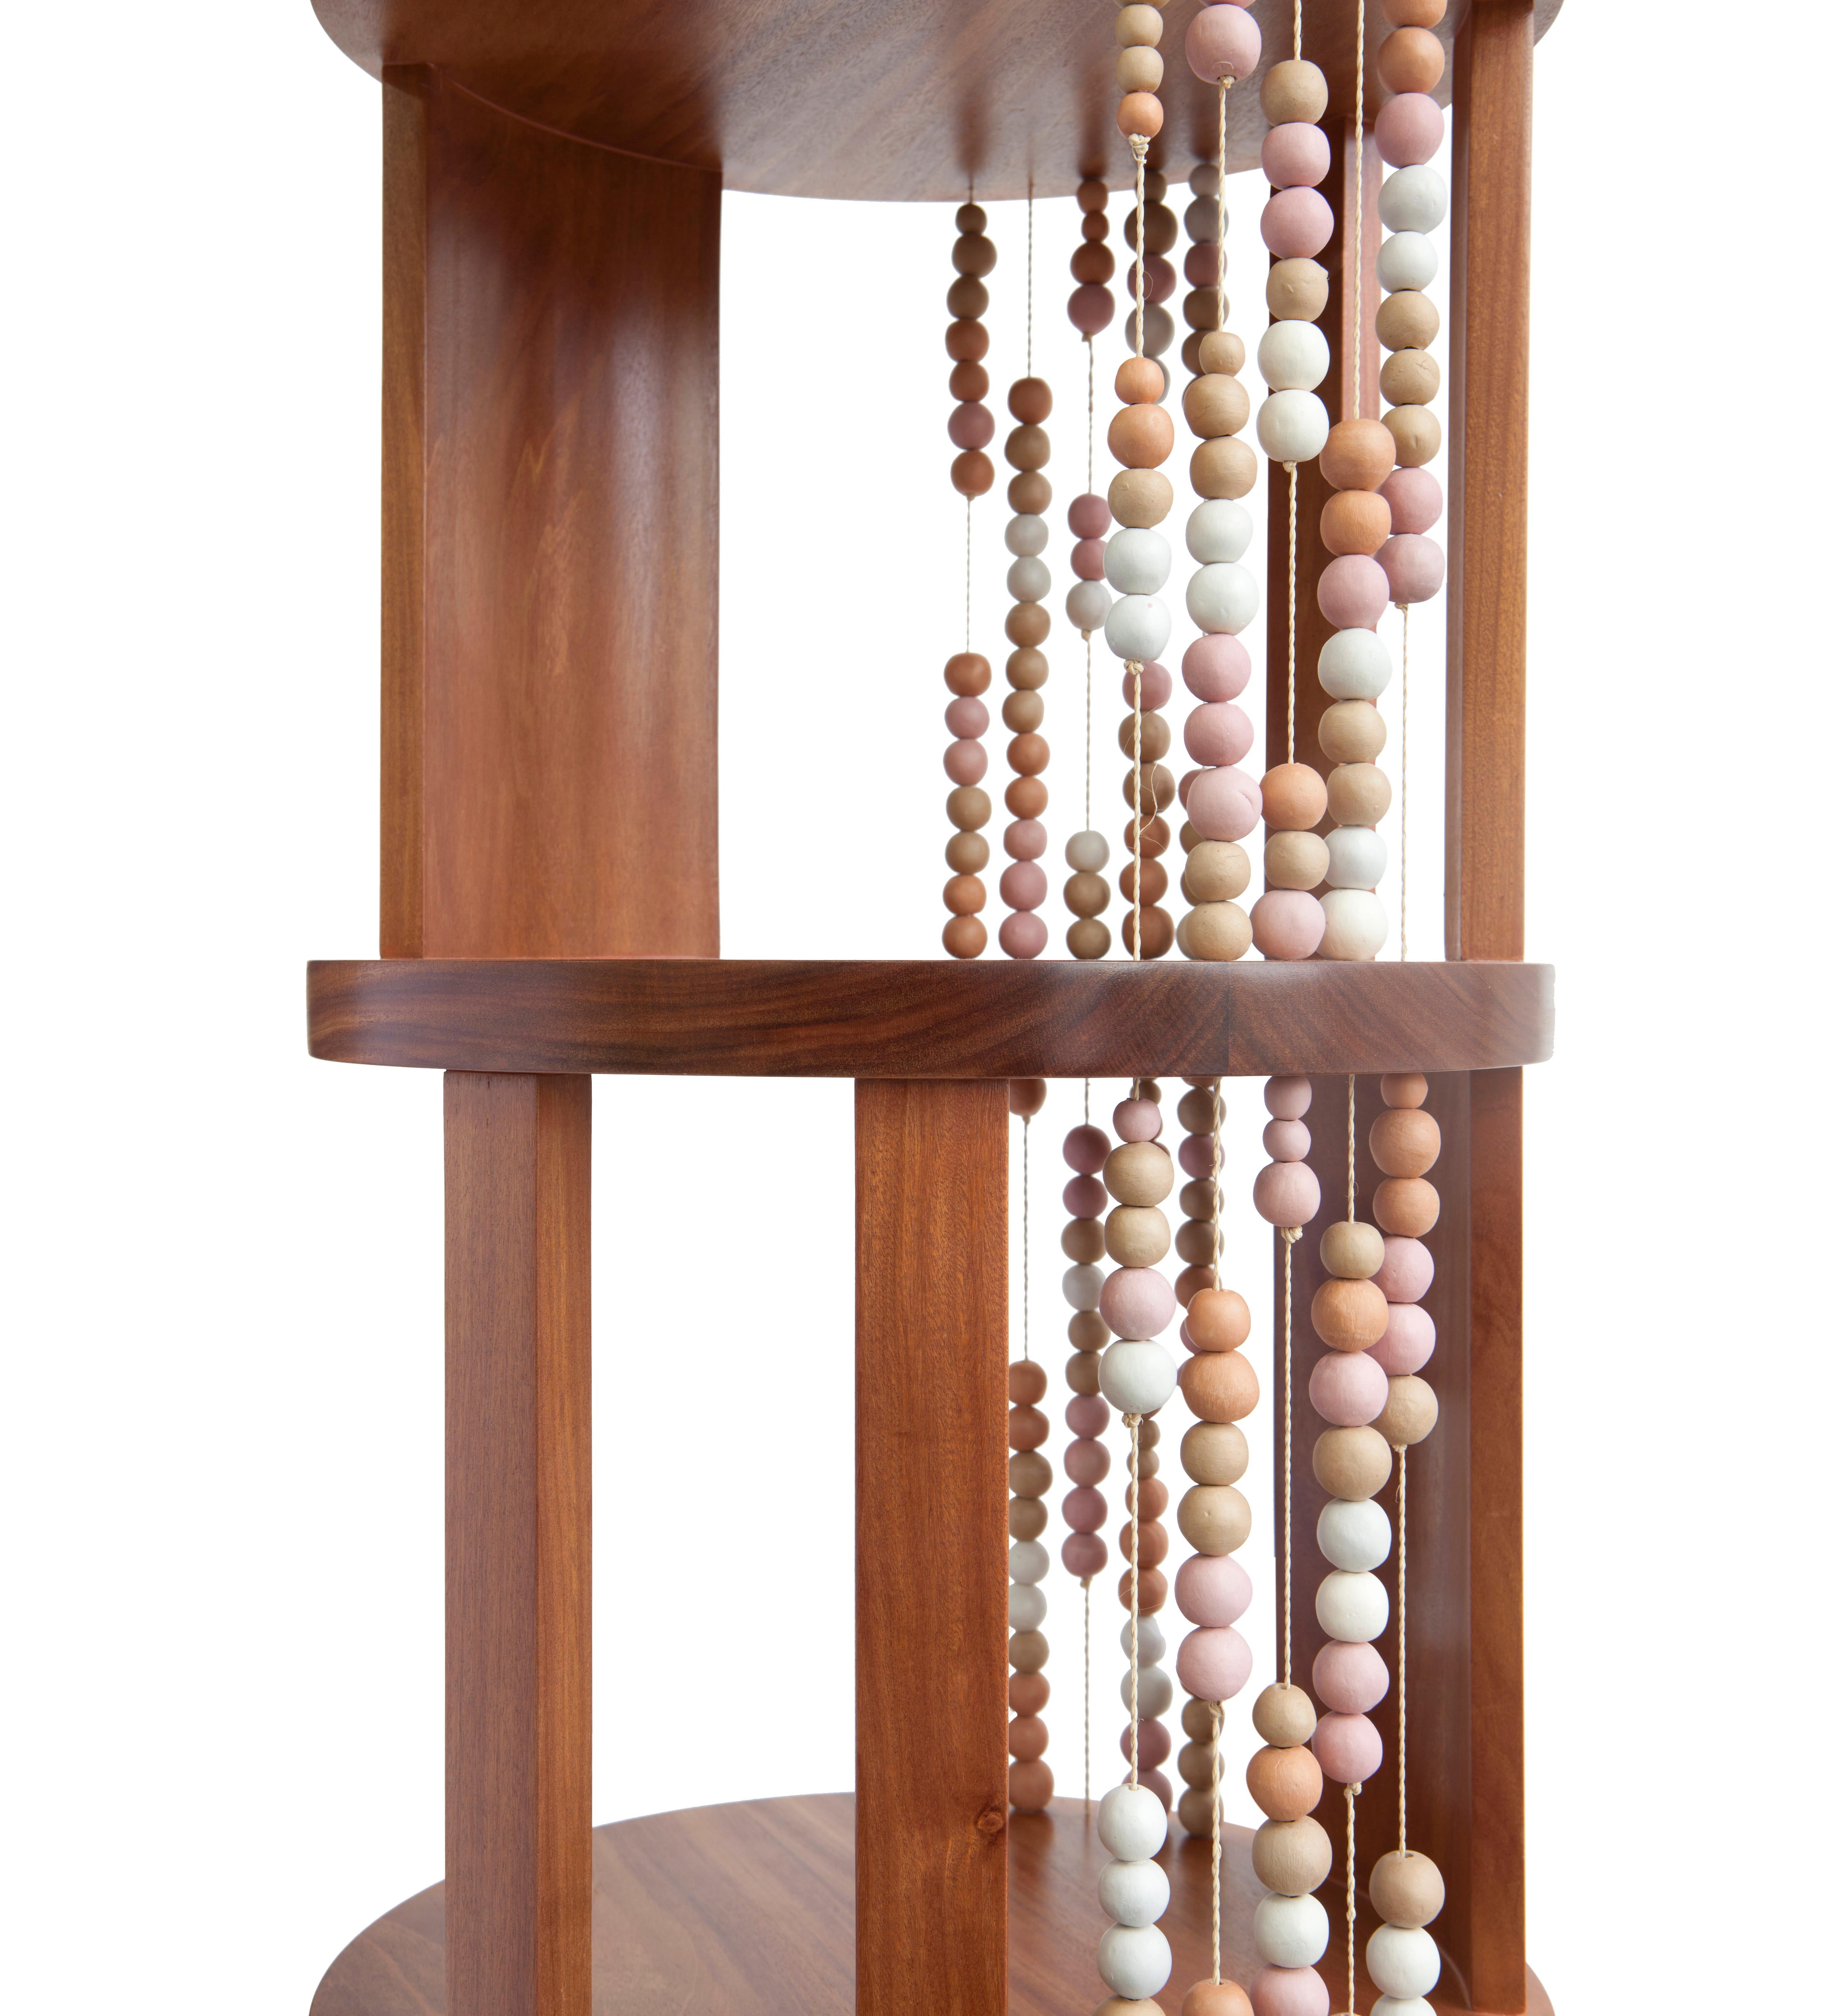 All the levels of this round bookcase, made of cabreuva hardwood, are permeated by buriti palms yarns with ceramic beads, creating different compositions depending on the angle we look at it. All the soft colored shades of the ceramic come from the